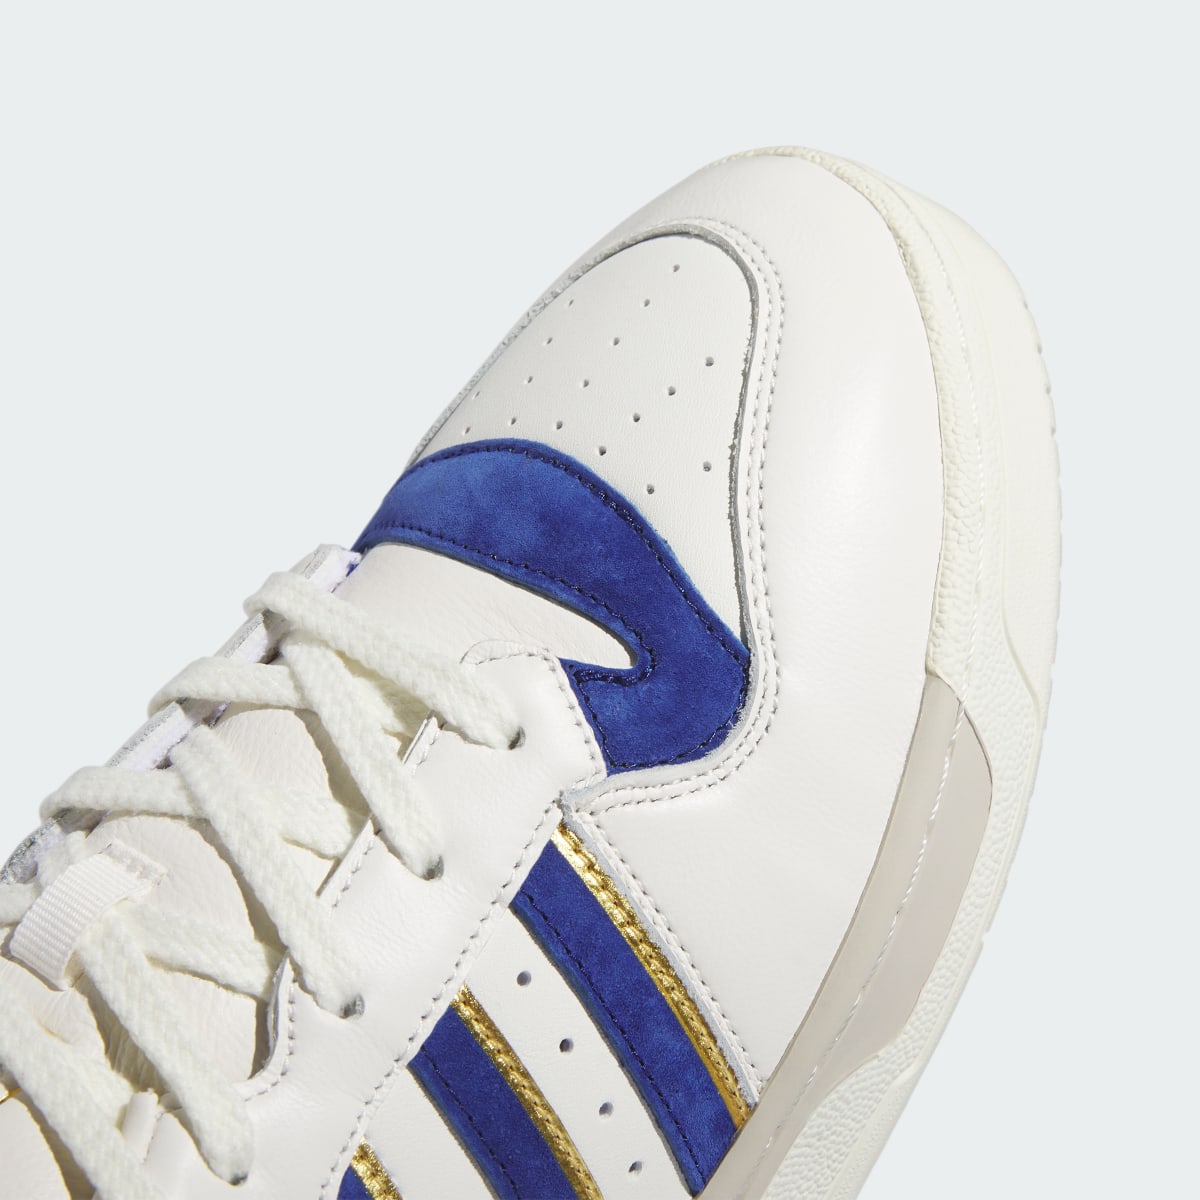 Adidas Rivalry 86 Low Shoes. 9